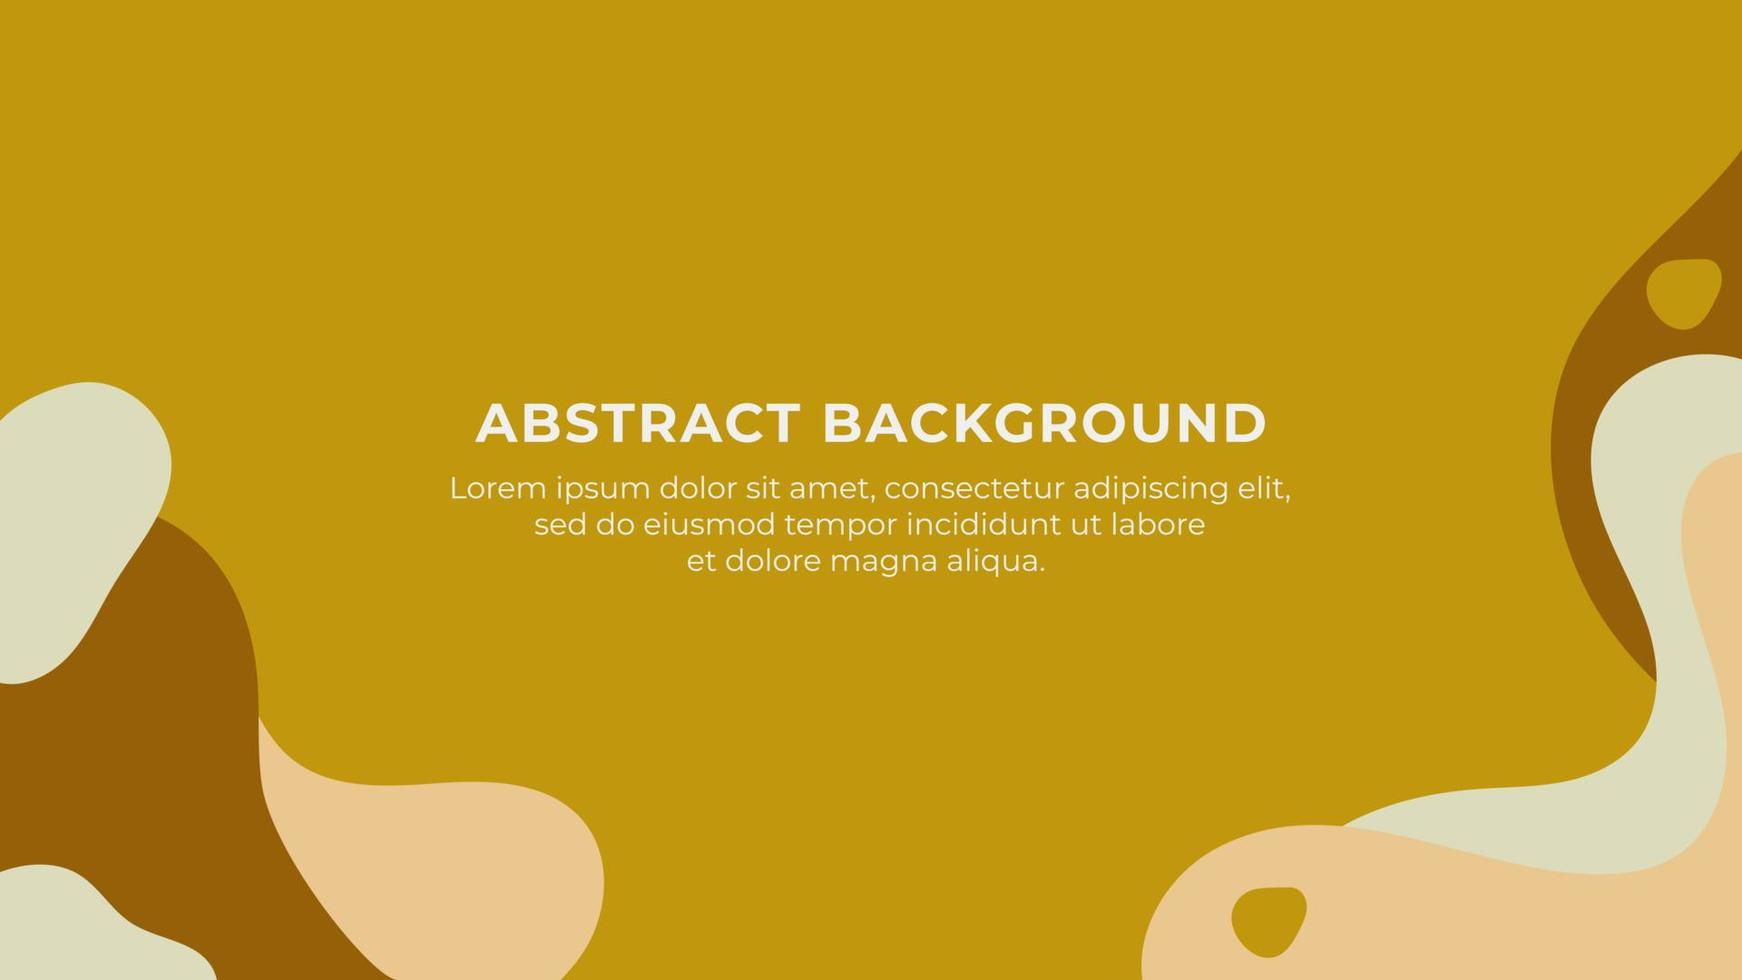 Vector graphic of Abstract colorful background. with copy space and also liquid shape. Using gold and white color scheme. Suitable for background of web banner